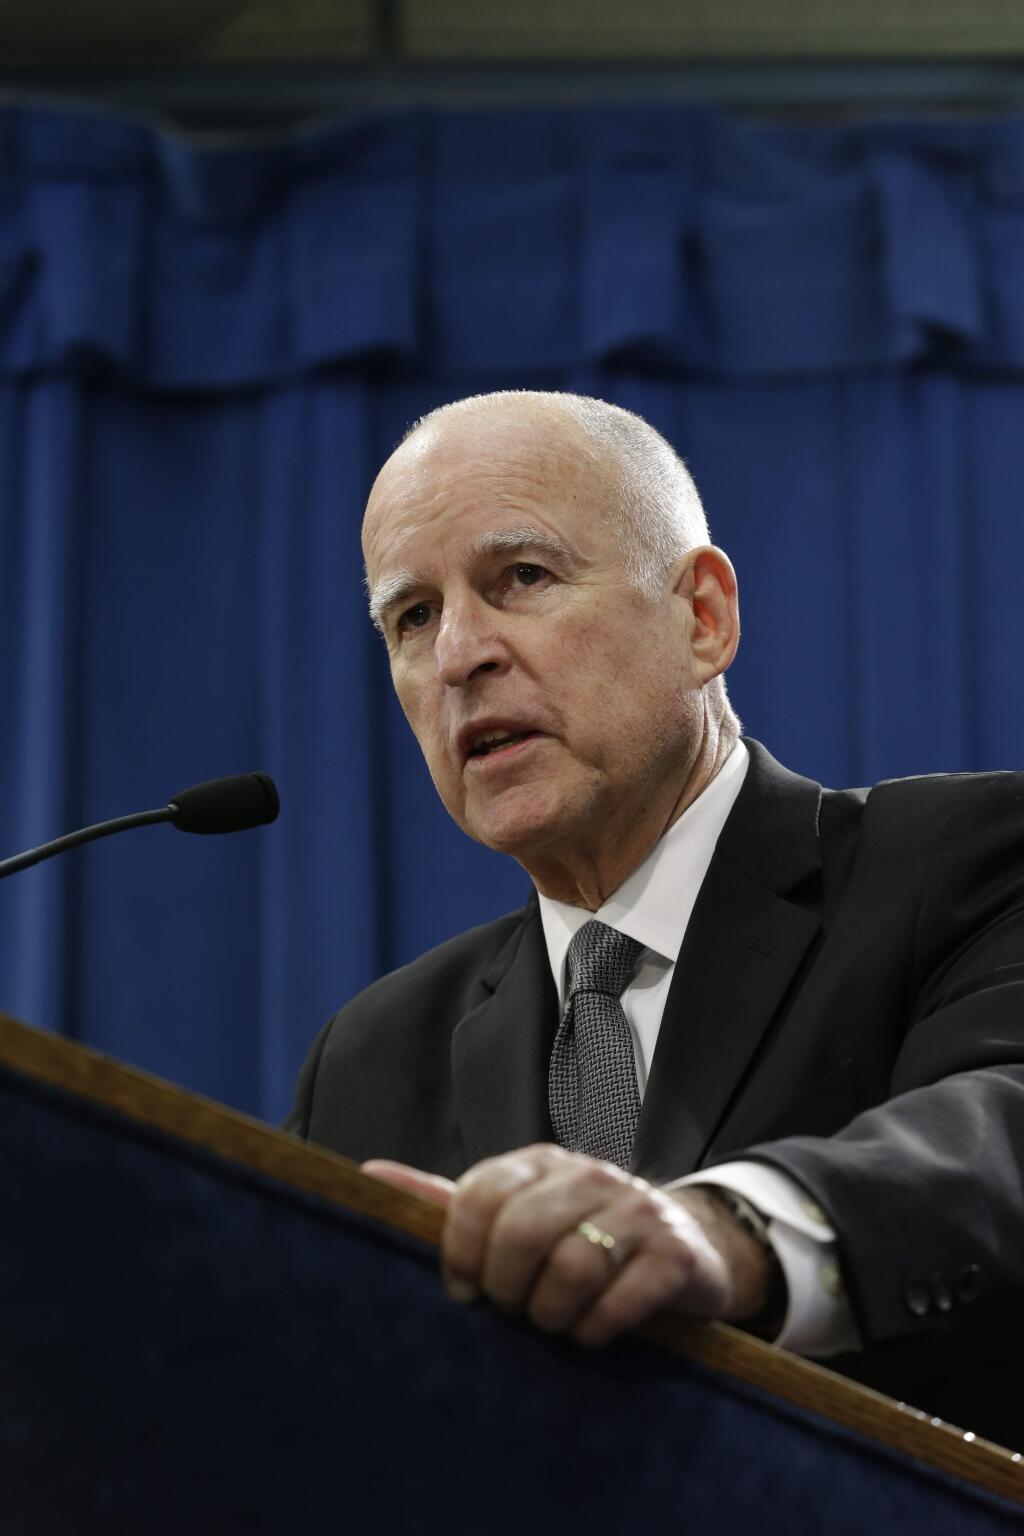 In this Jan. 9, 2015 photo, Gov. Jerry Brown discusses his proposed 2015-2016 state budget plan which includes a proposal to deal with the unfunded liability for the state employee health care retirement benefits at during Capitol news conference in Sacramento, Calif. Brown said that he wants to negotiate with state workers to start chipping in half of the cost of their benefits to bring down the estimated $72 billion unfunded liability.(AP Photo/Rich Pedroncelli)